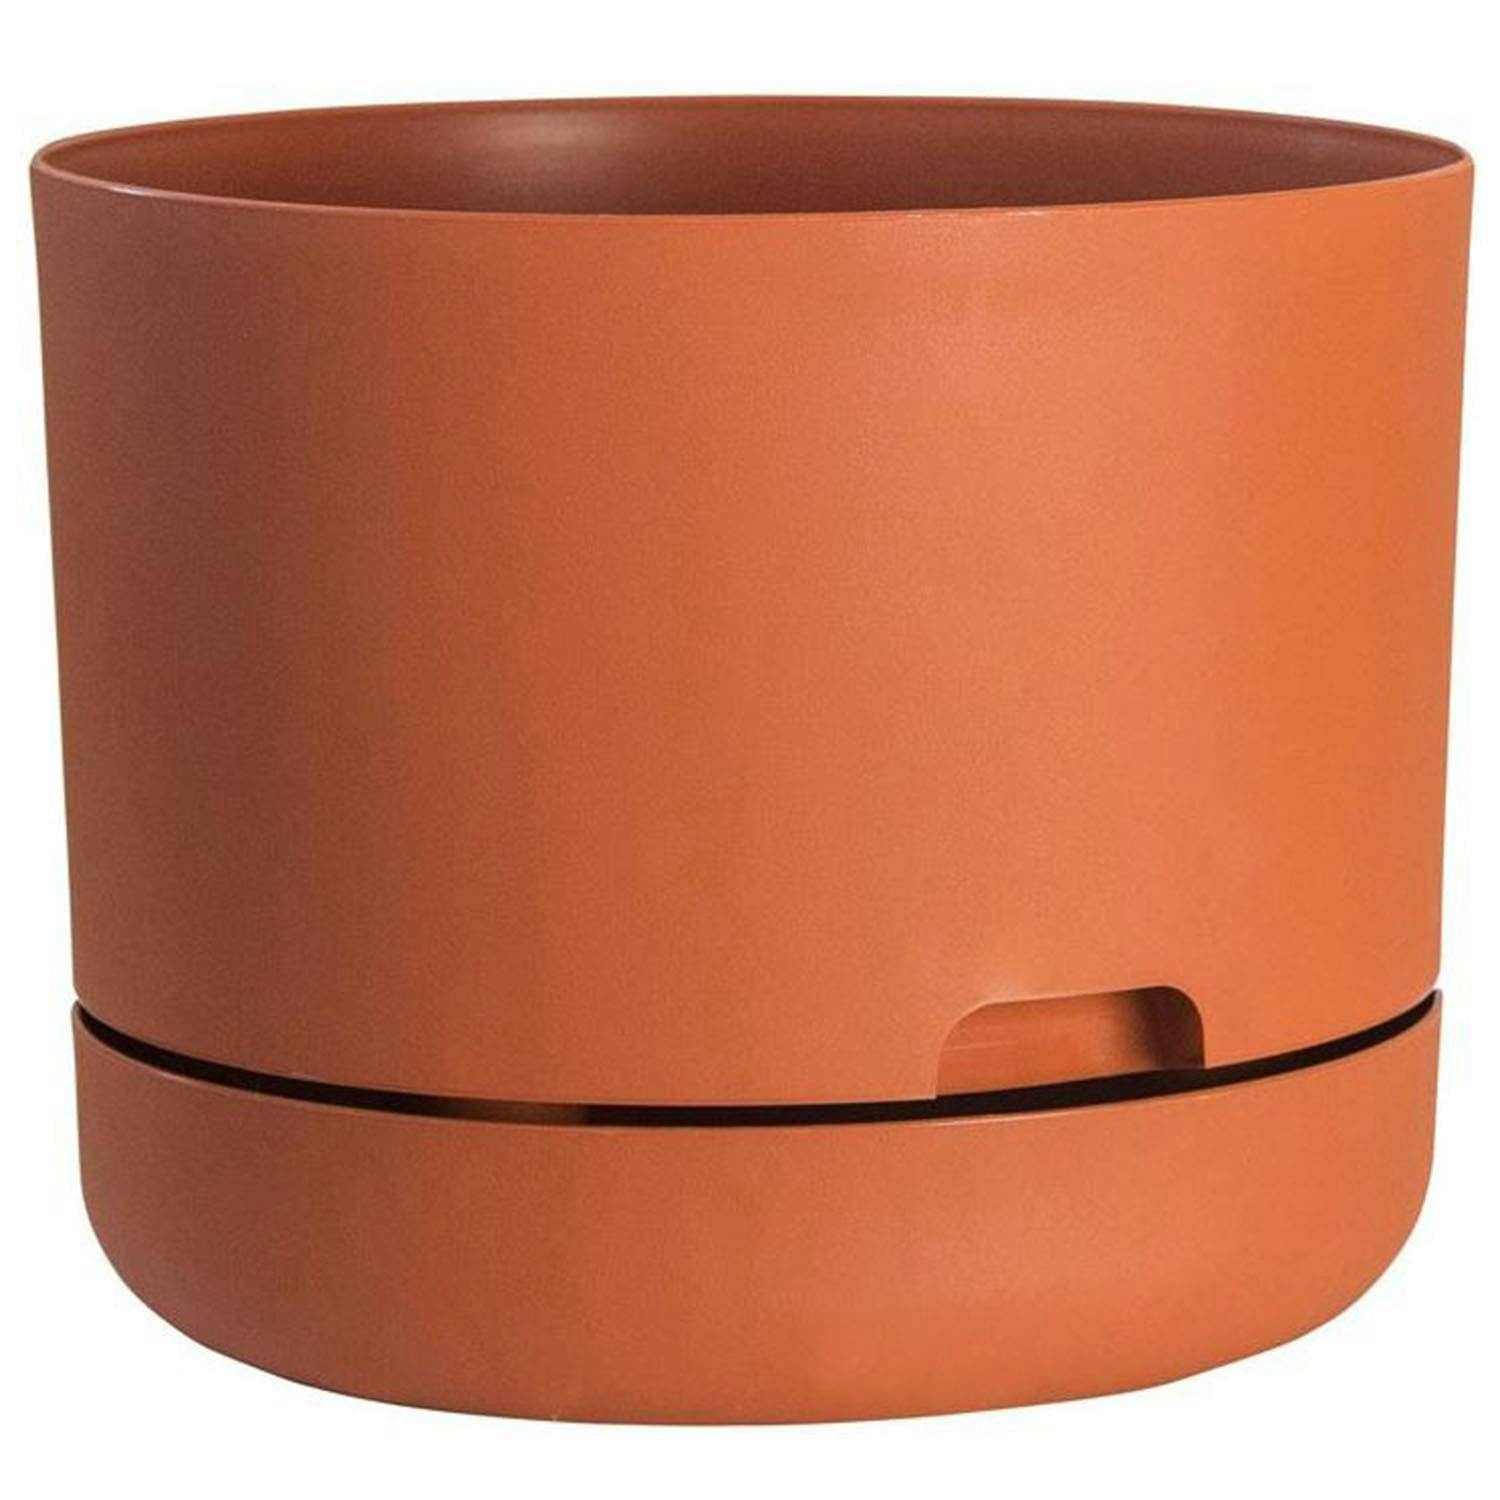 Terracotta Round Self-Watering Planter with Saucer for Indoor & Outdoor